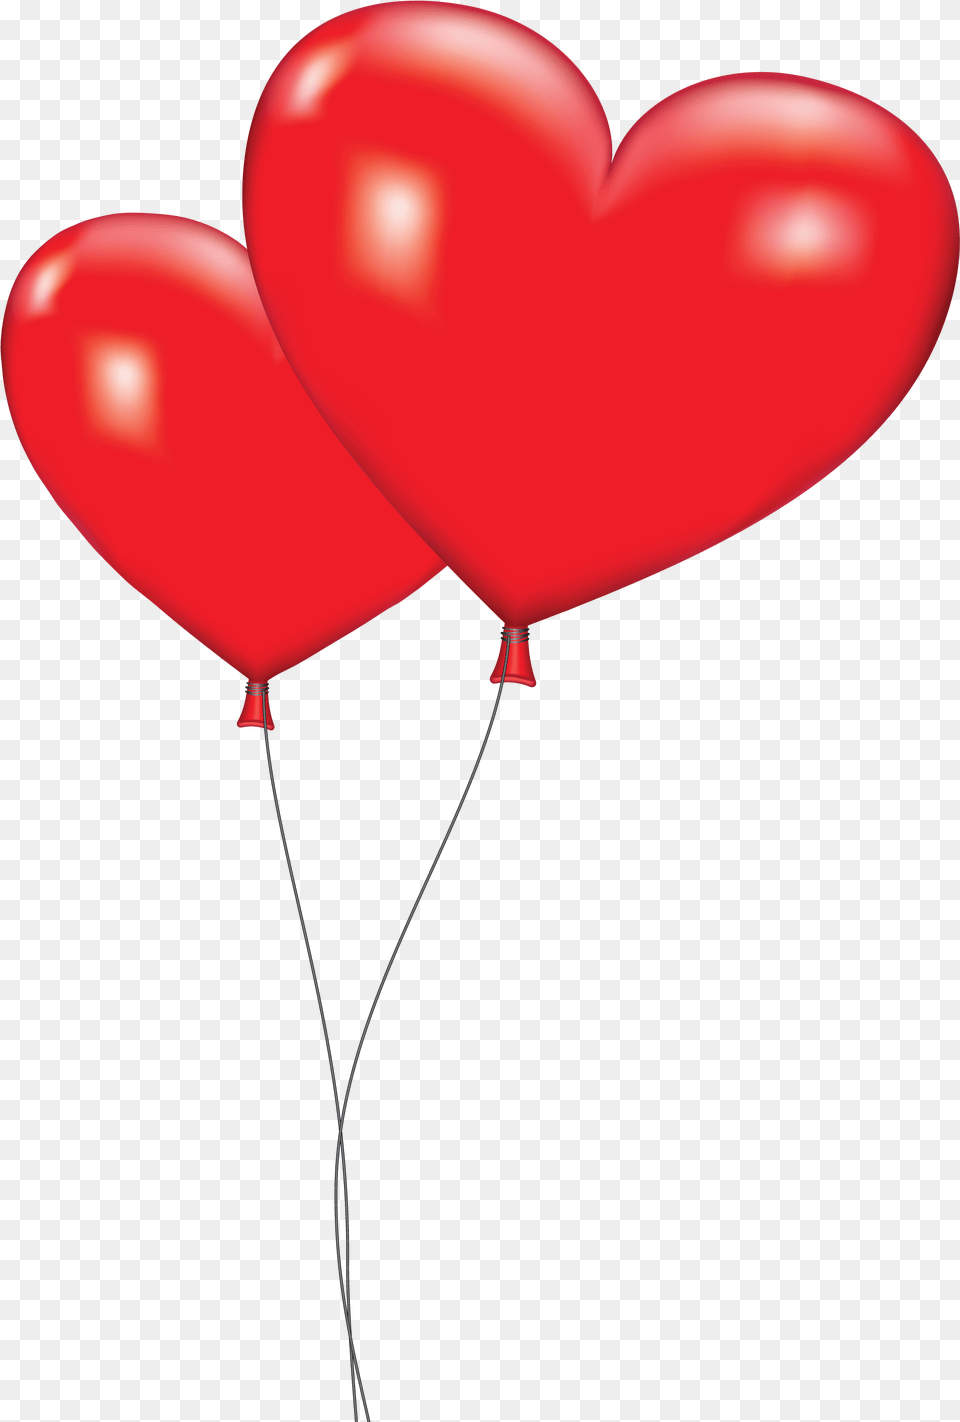 Library Of Heart Balloon Vector Black And White Heart Balloons Clipart Free Png Download